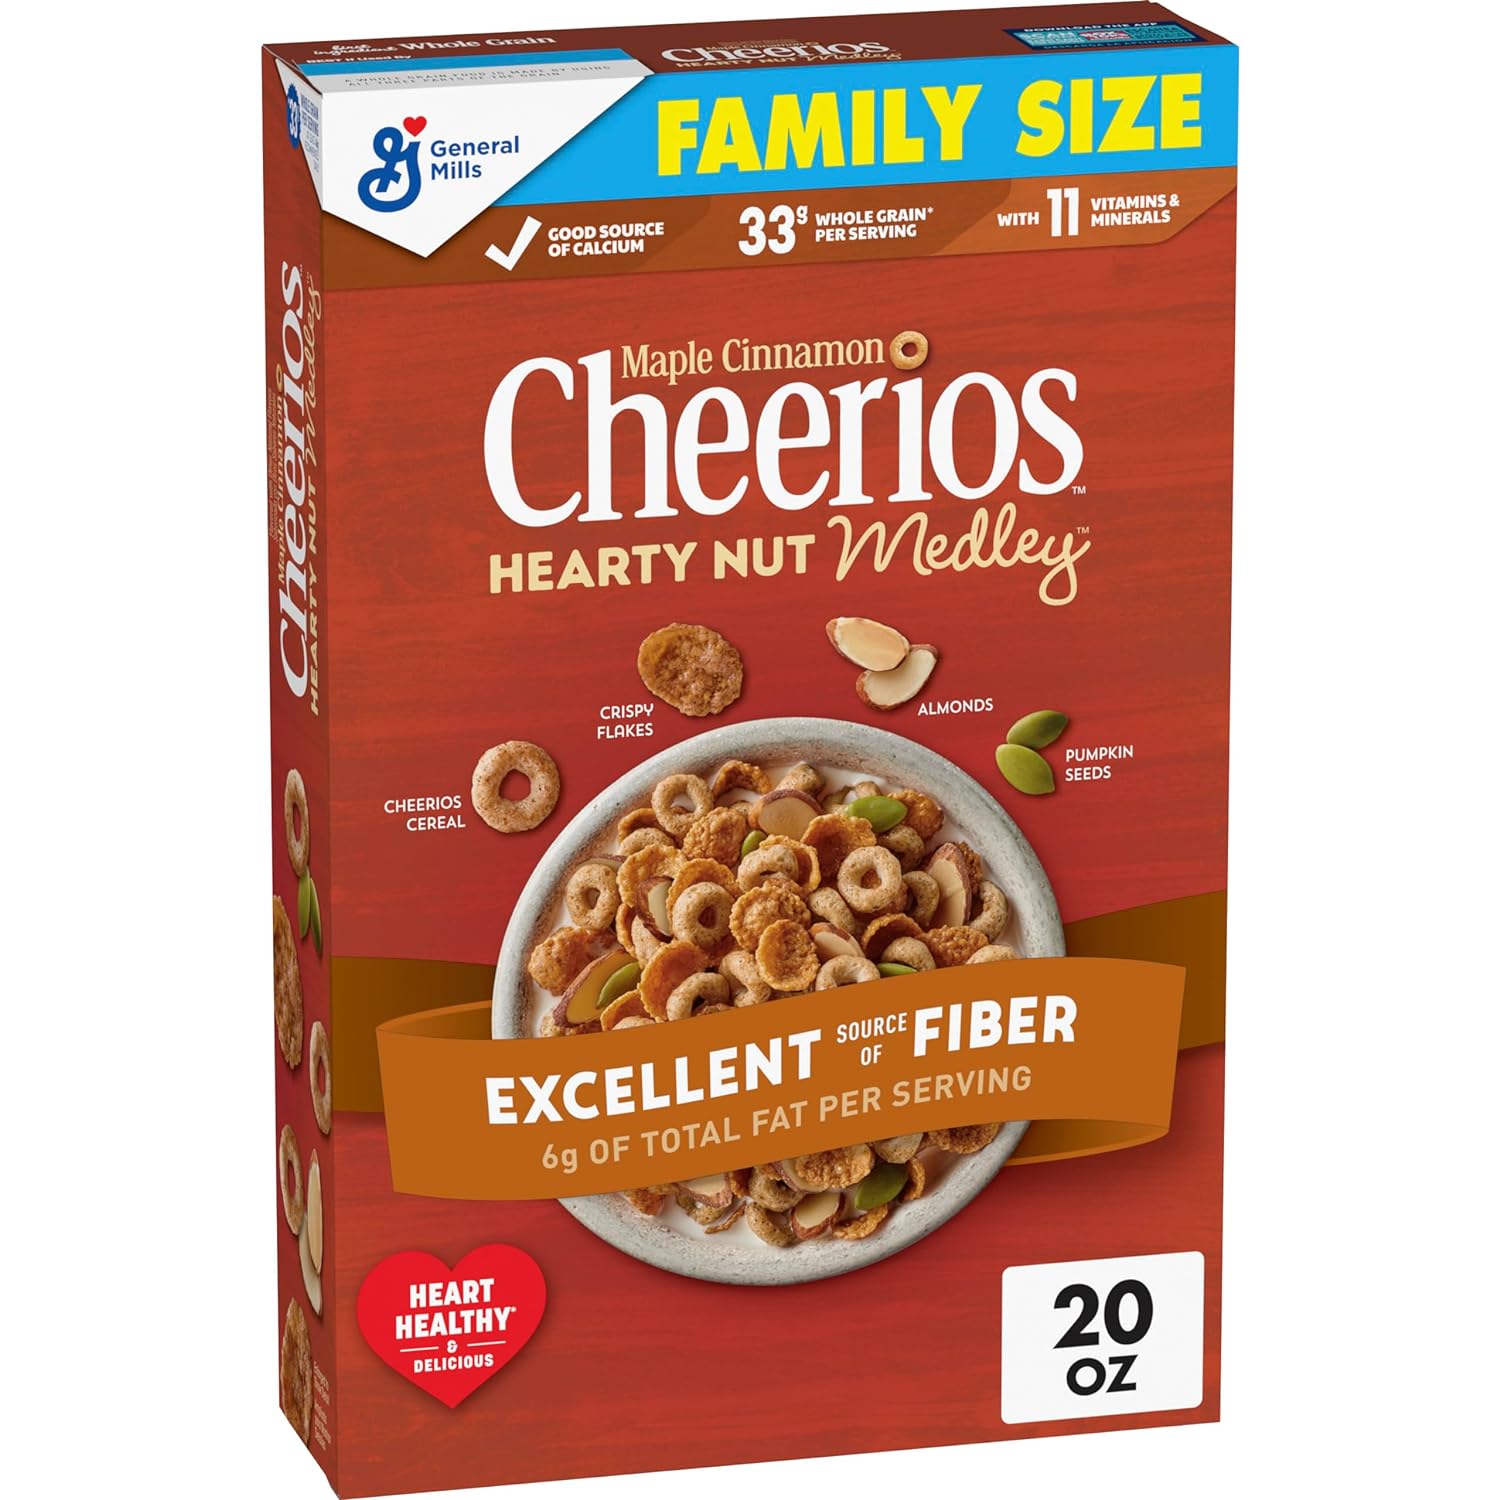 Cheerios Hearty Nut Medley Breakfast Cereal, Maple Cinnamon Flavored, Made With Whole Grain, Family Size, 20 oz